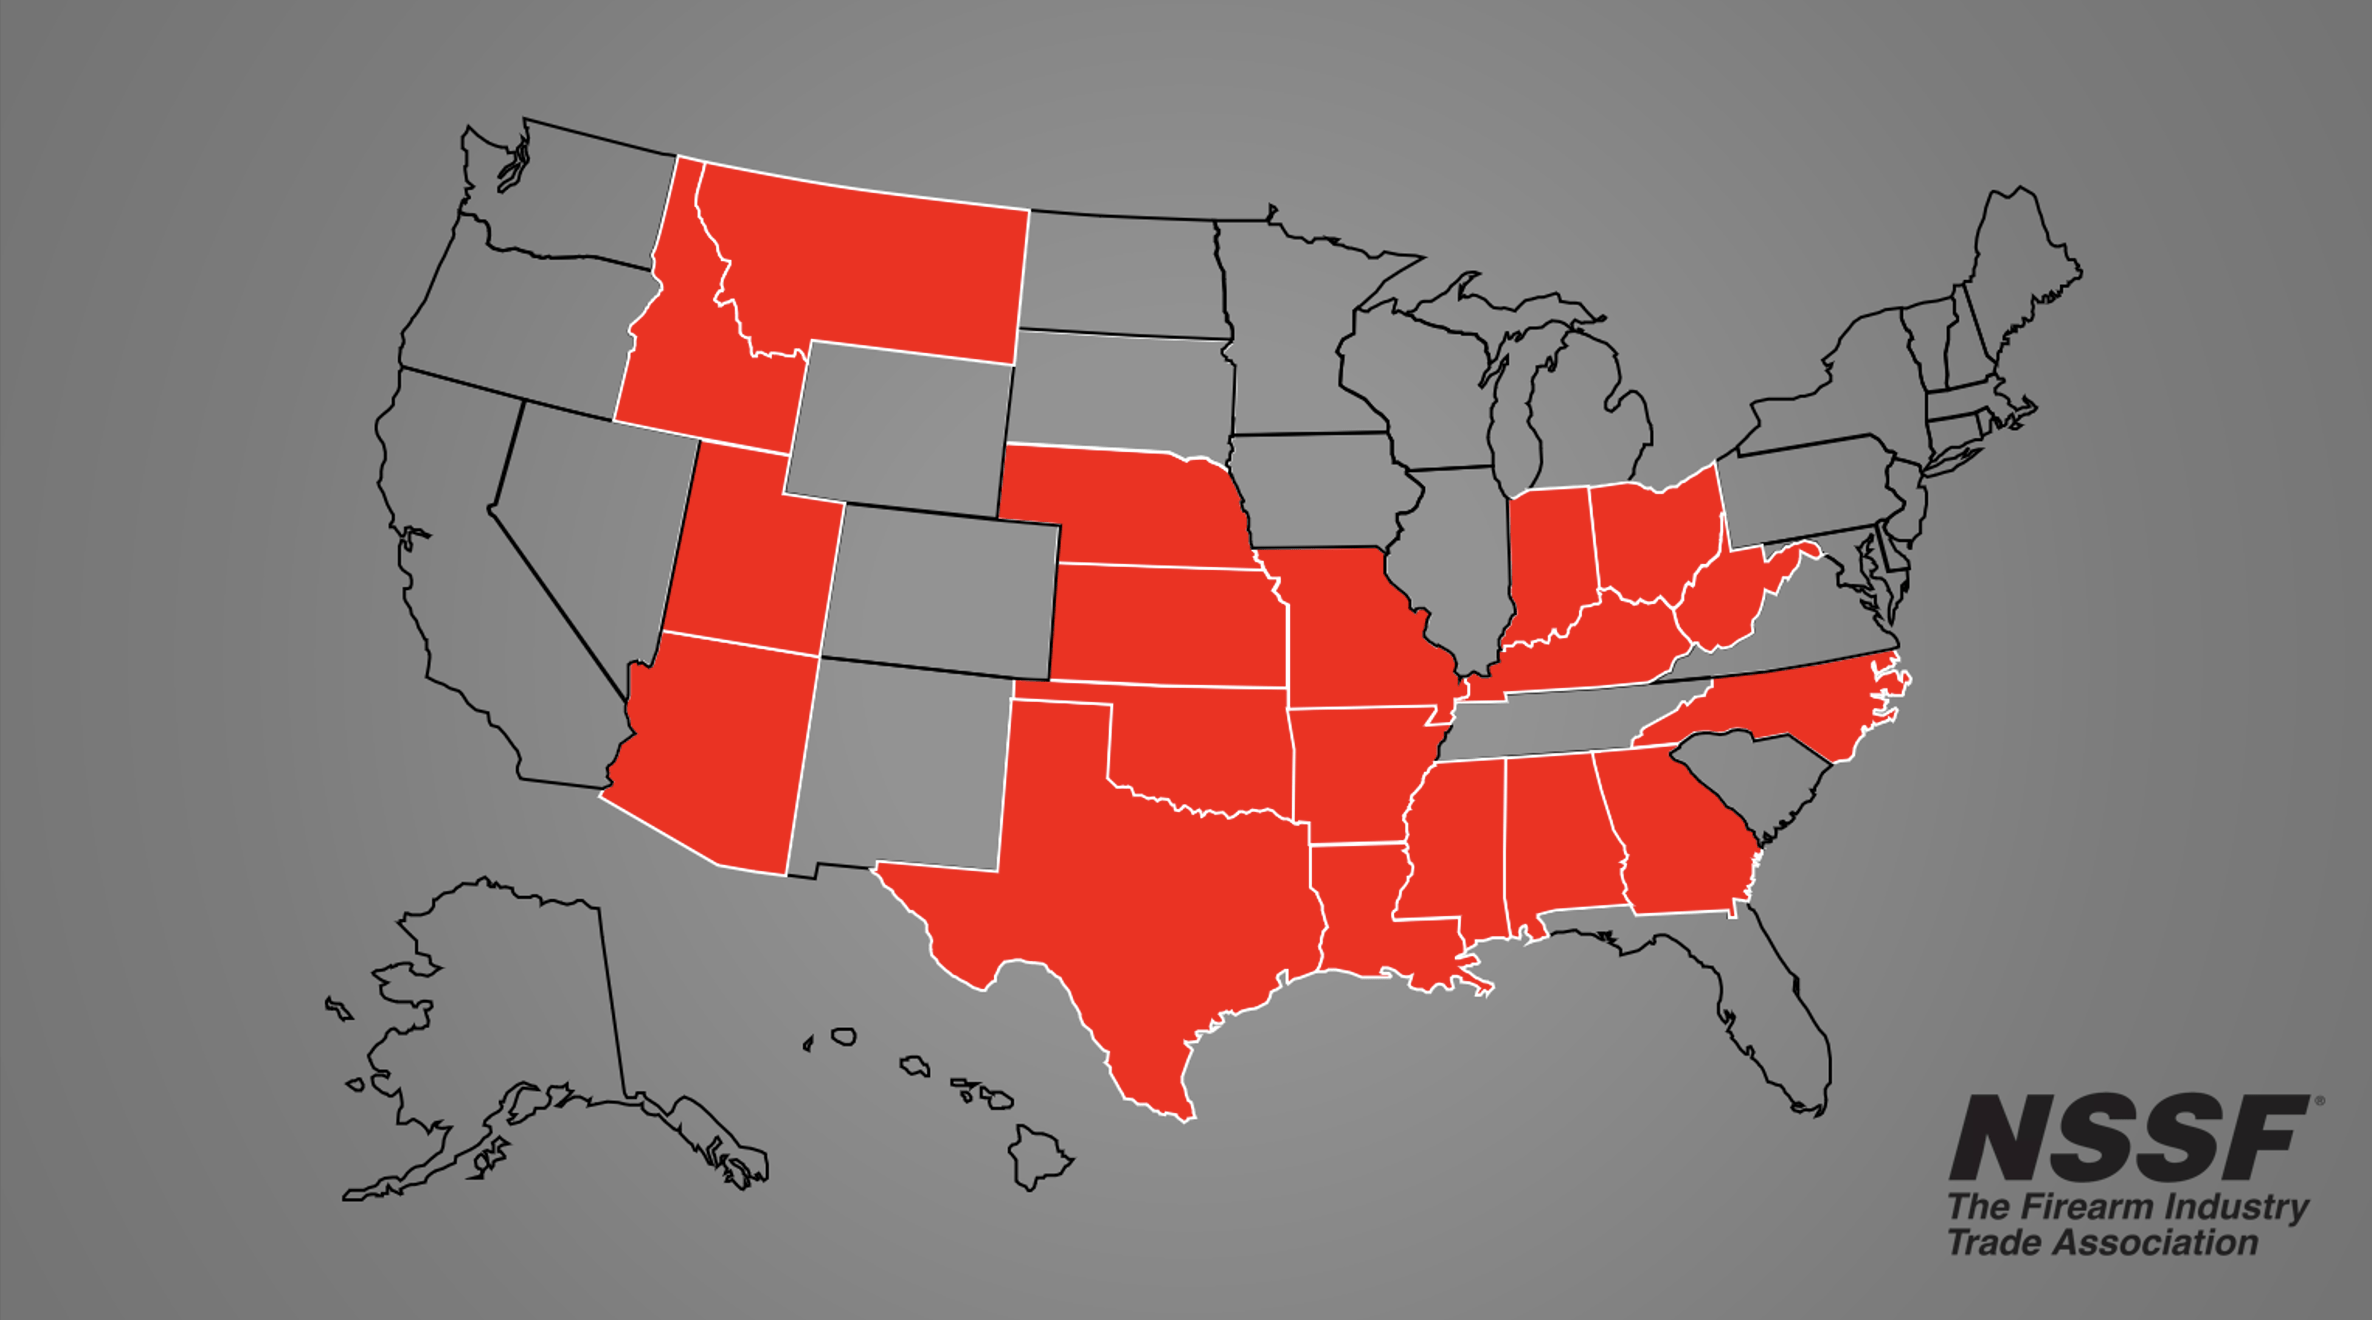 Map of U.S. highlighting 19 states where AGs have voiced concerns about BlackRocks ESG agenda.